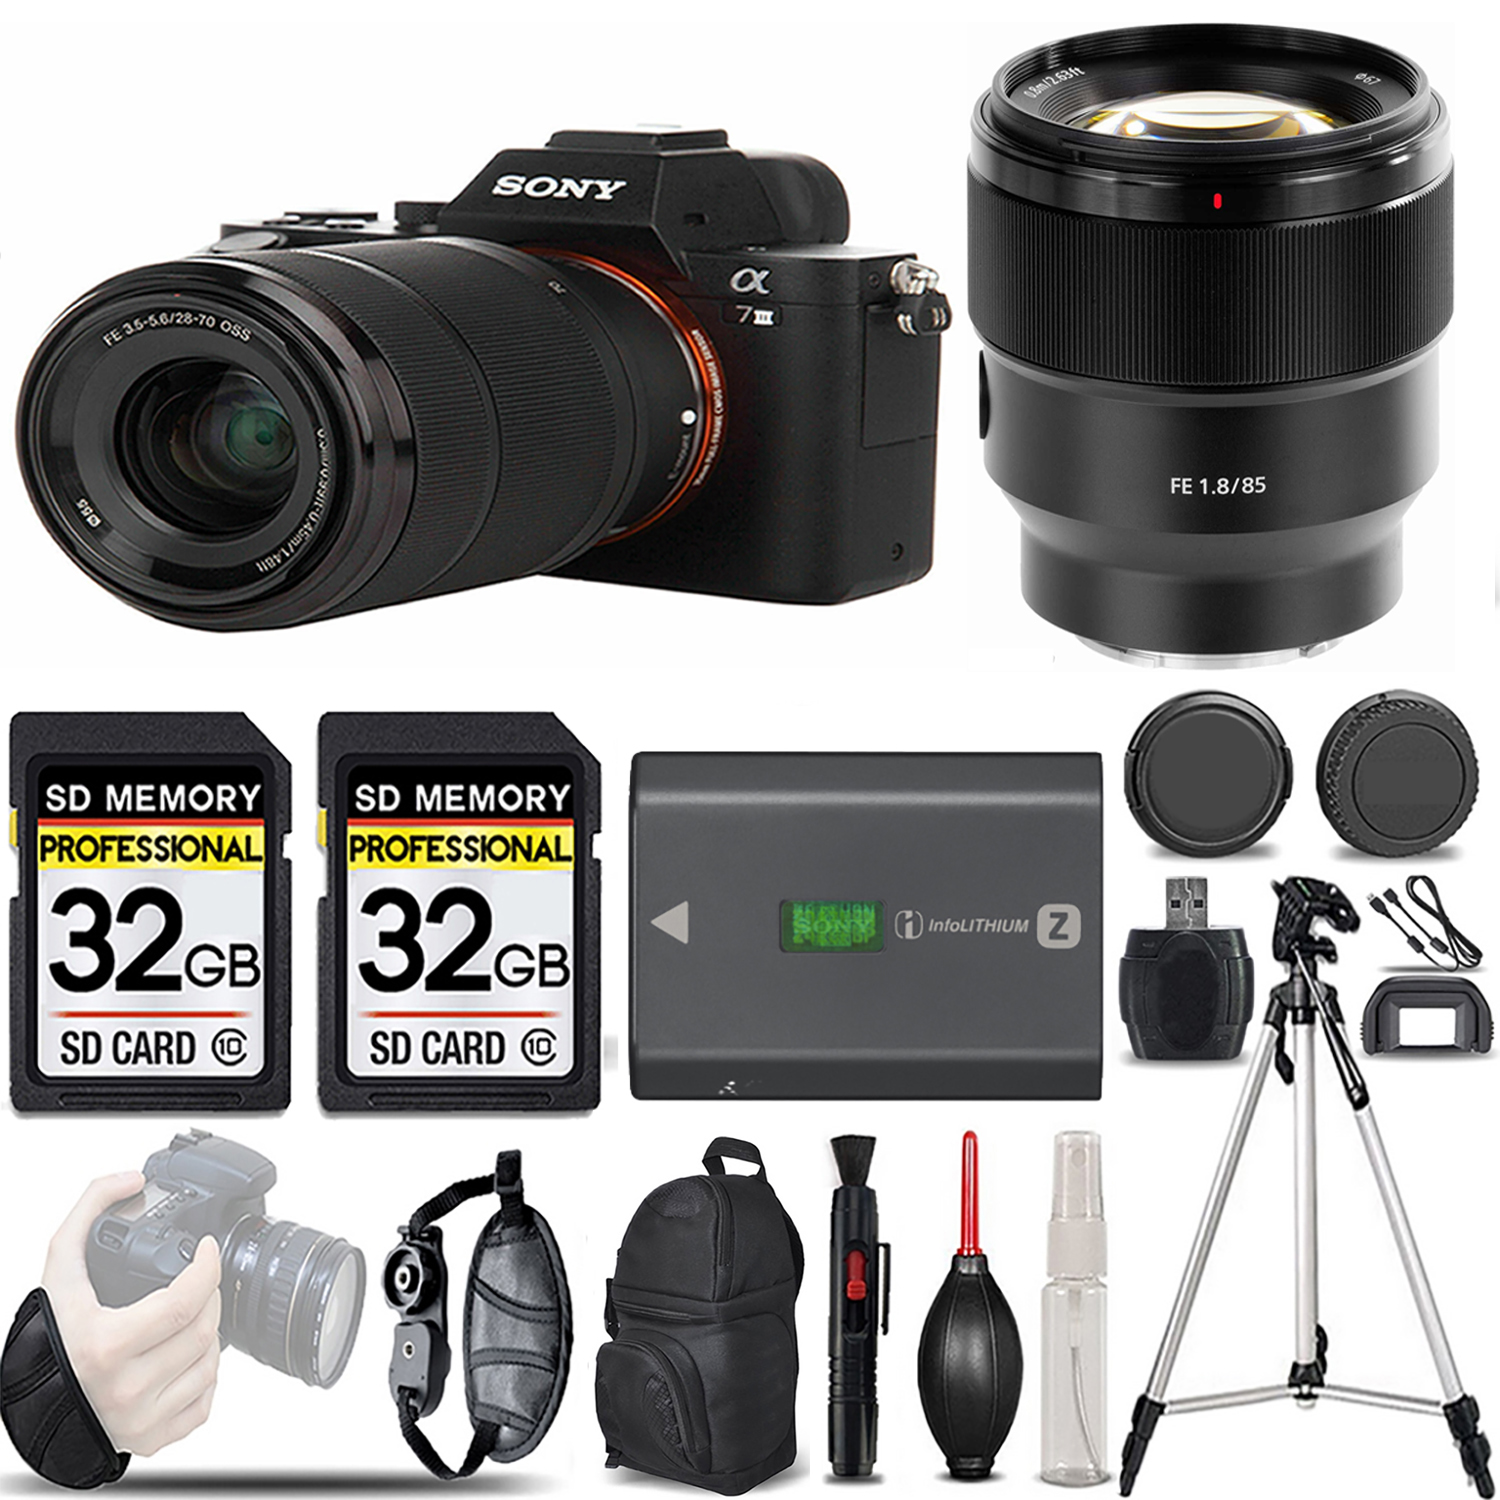 a7 III  Camera + 28-70mm Lens + 85mm Lens + Extra Battery + 64GB -Basic Kit *FREE SHIPPING*